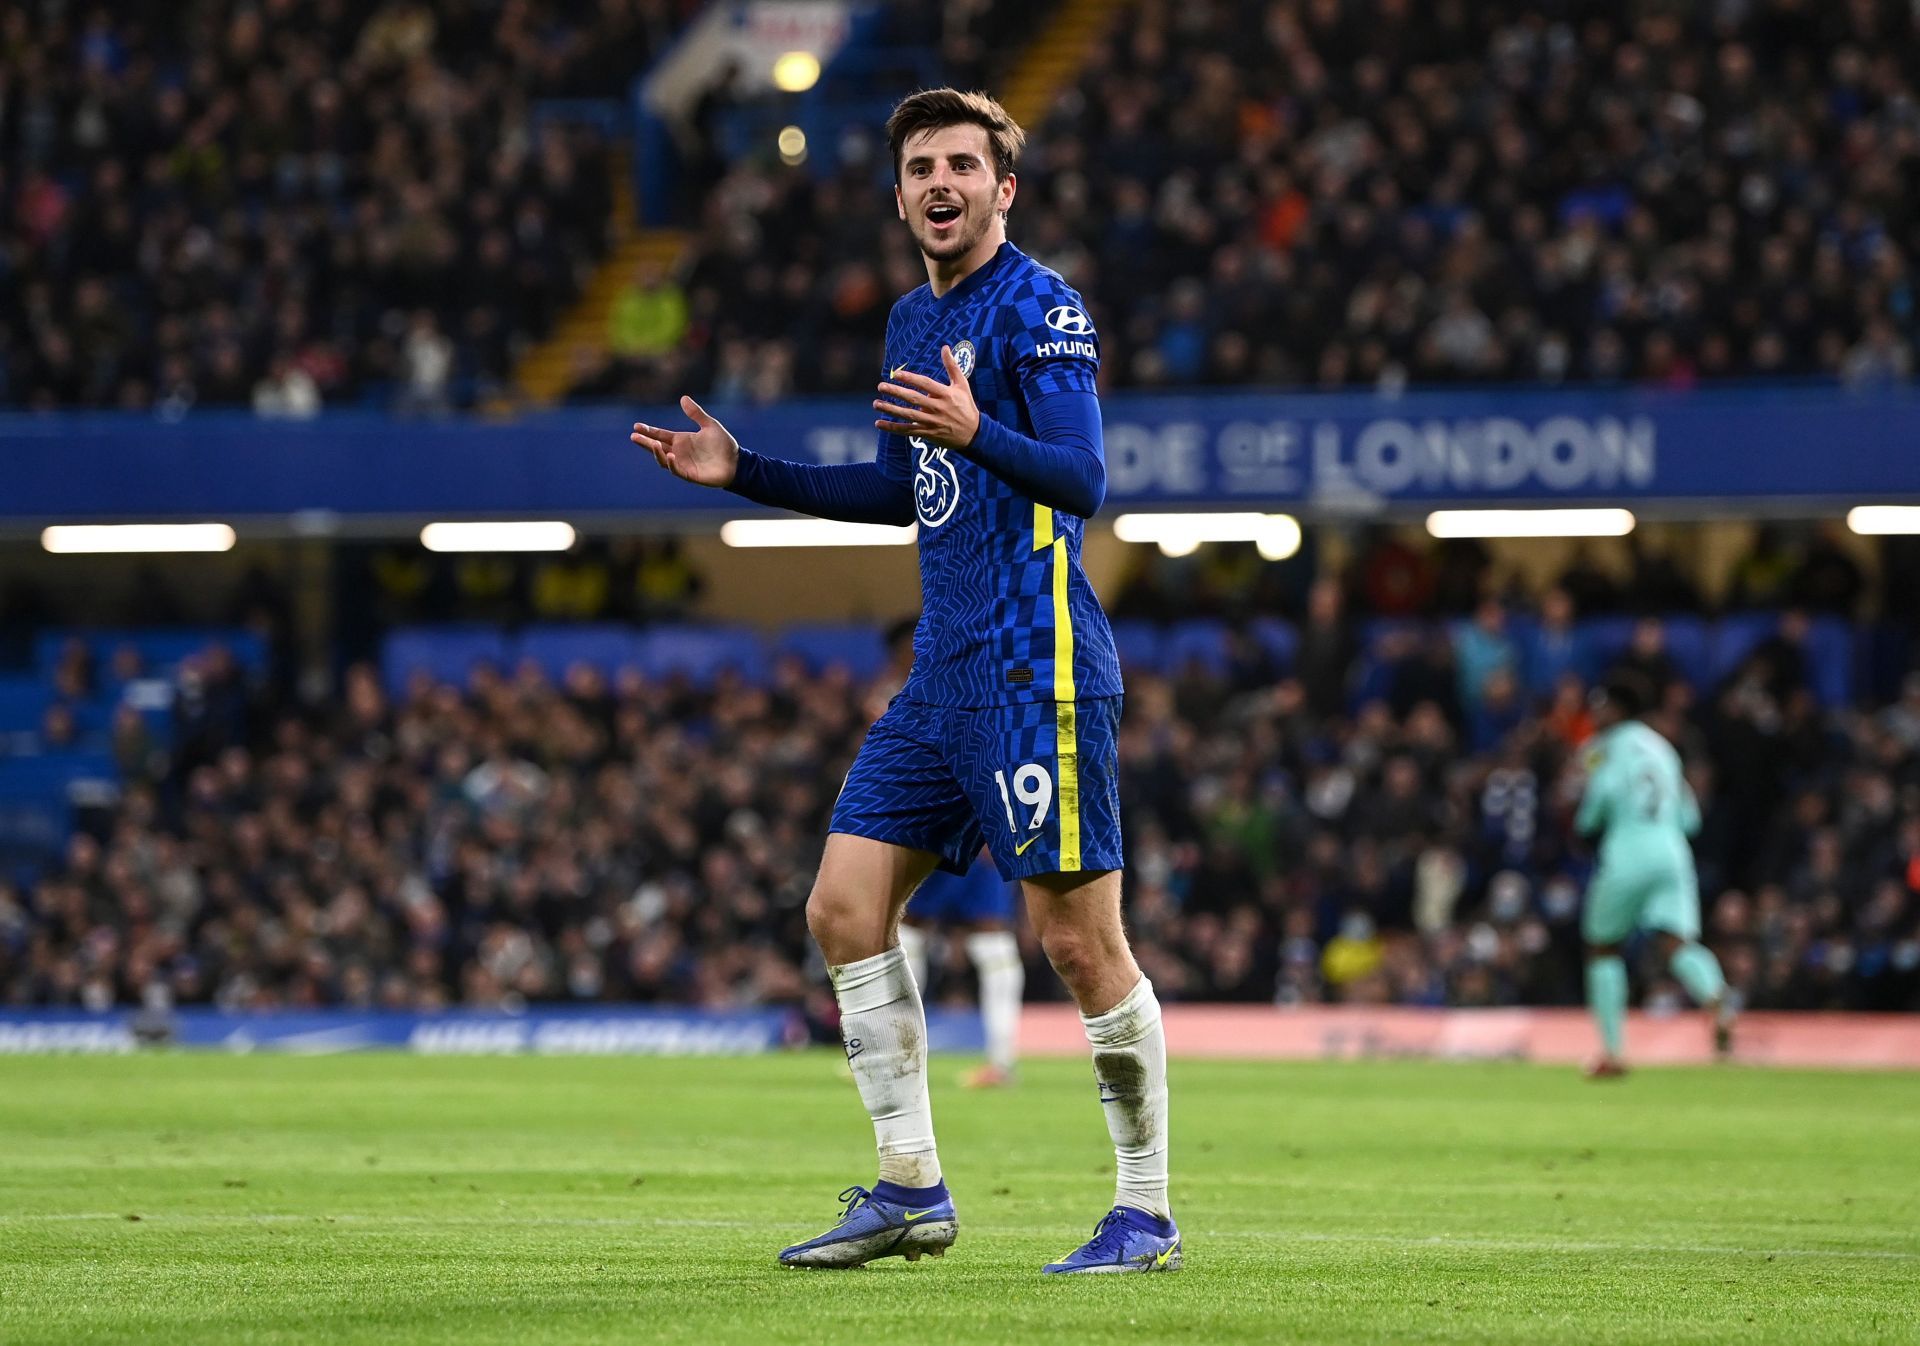 Mason Mount has been incredible for Chelsea in the Premier League.